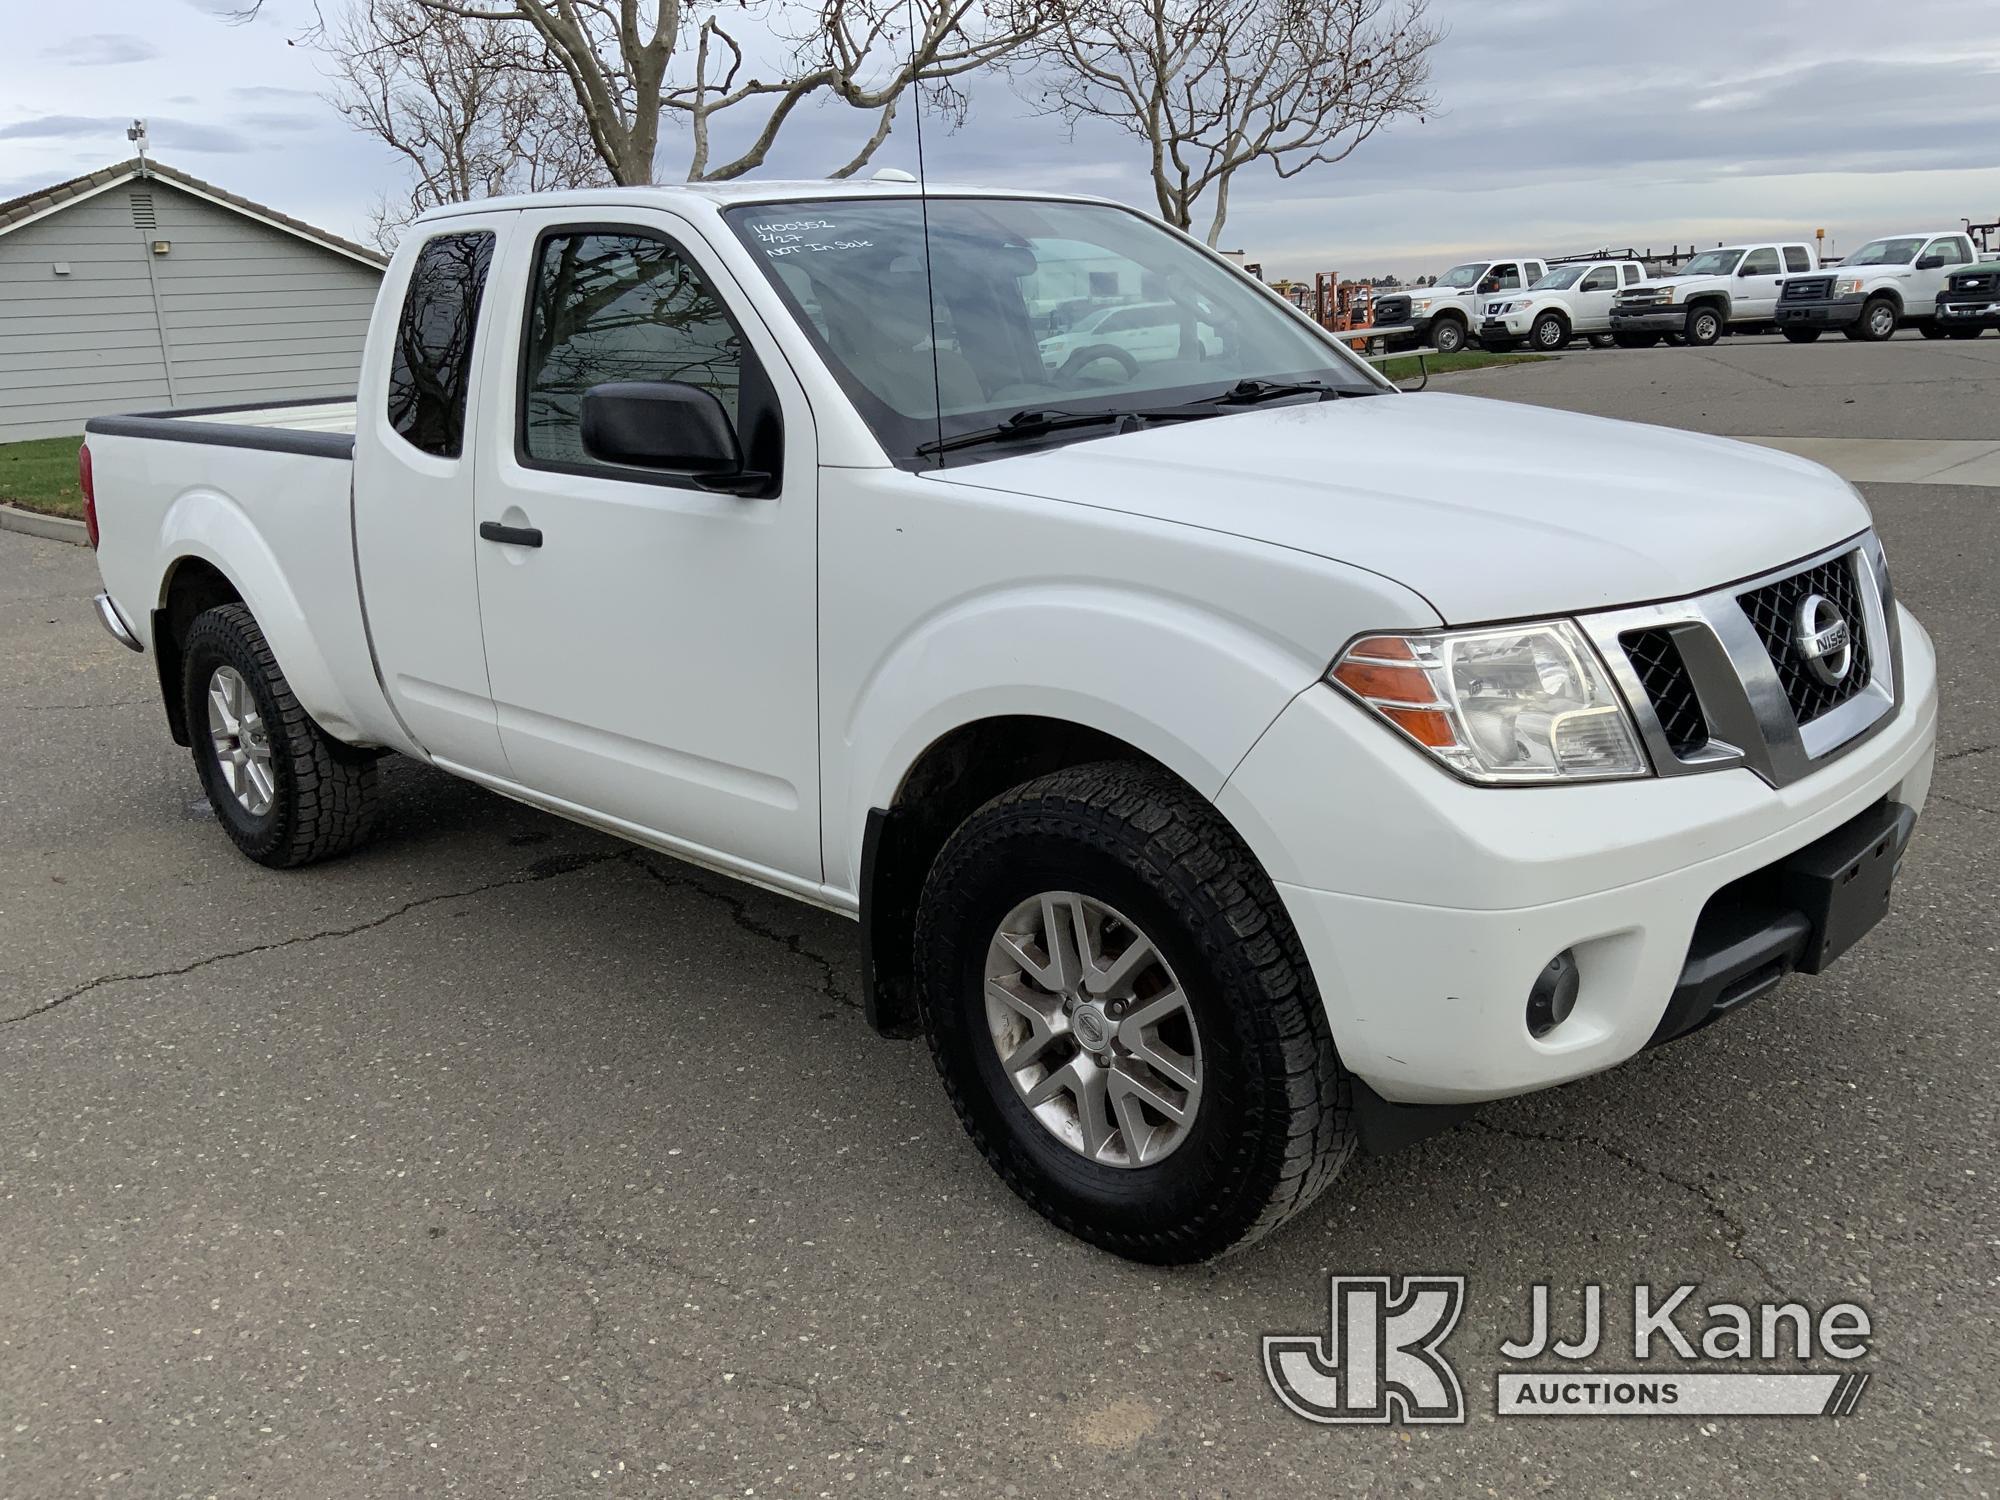 (Dixon, CA) 2016 Nissan Frontier Extended-Cab Pickup Truck Runs & Moves, Body Damage